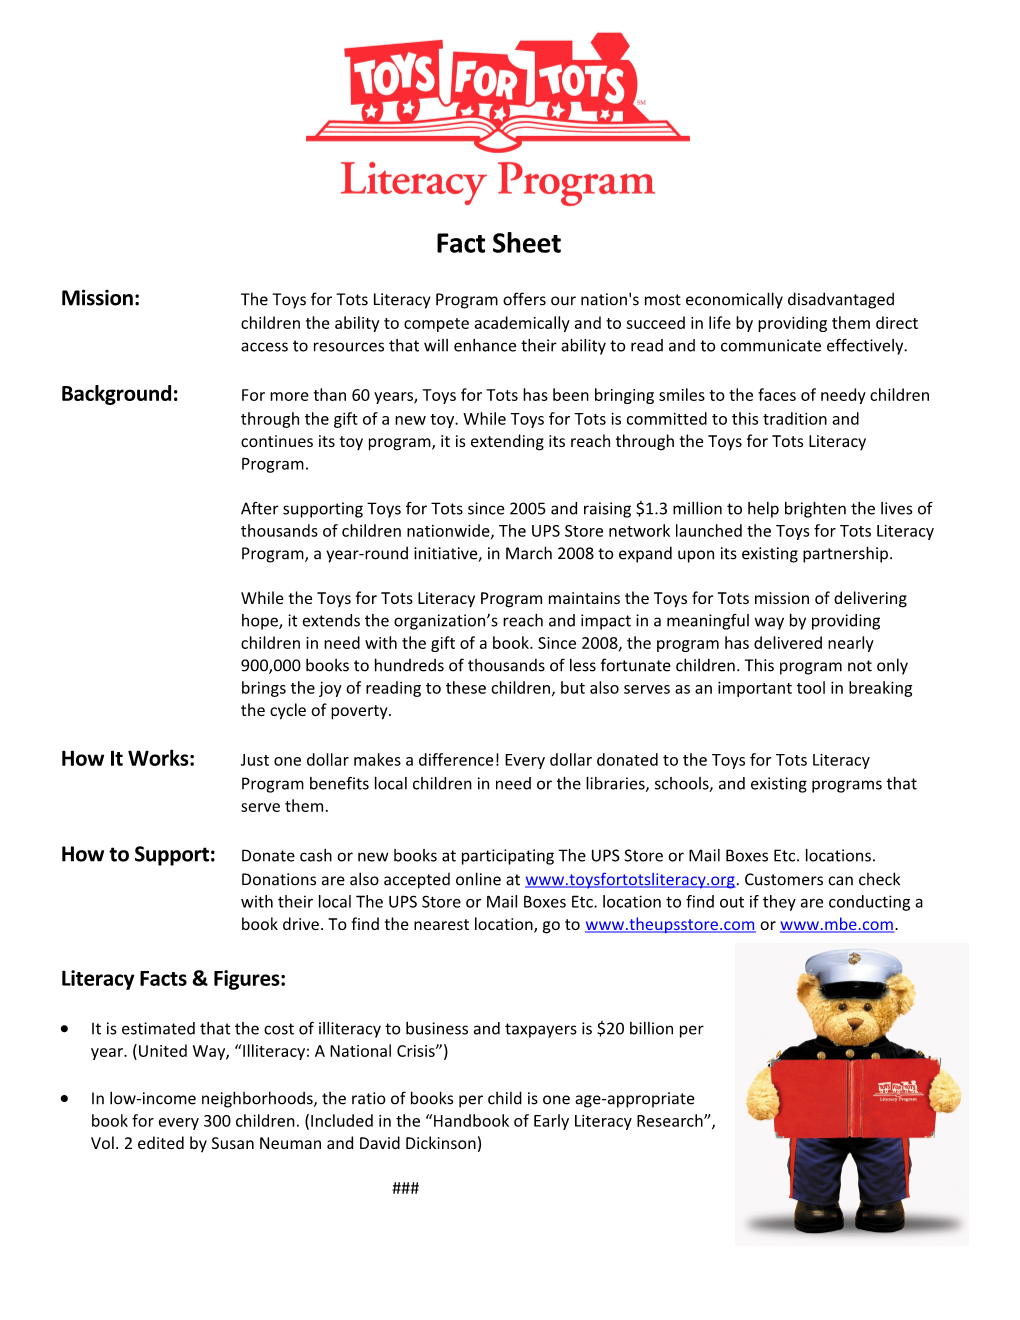 Mission: the Toys for Tots Literacy Program Offers Our Nation's Most Economically Disadvantaged